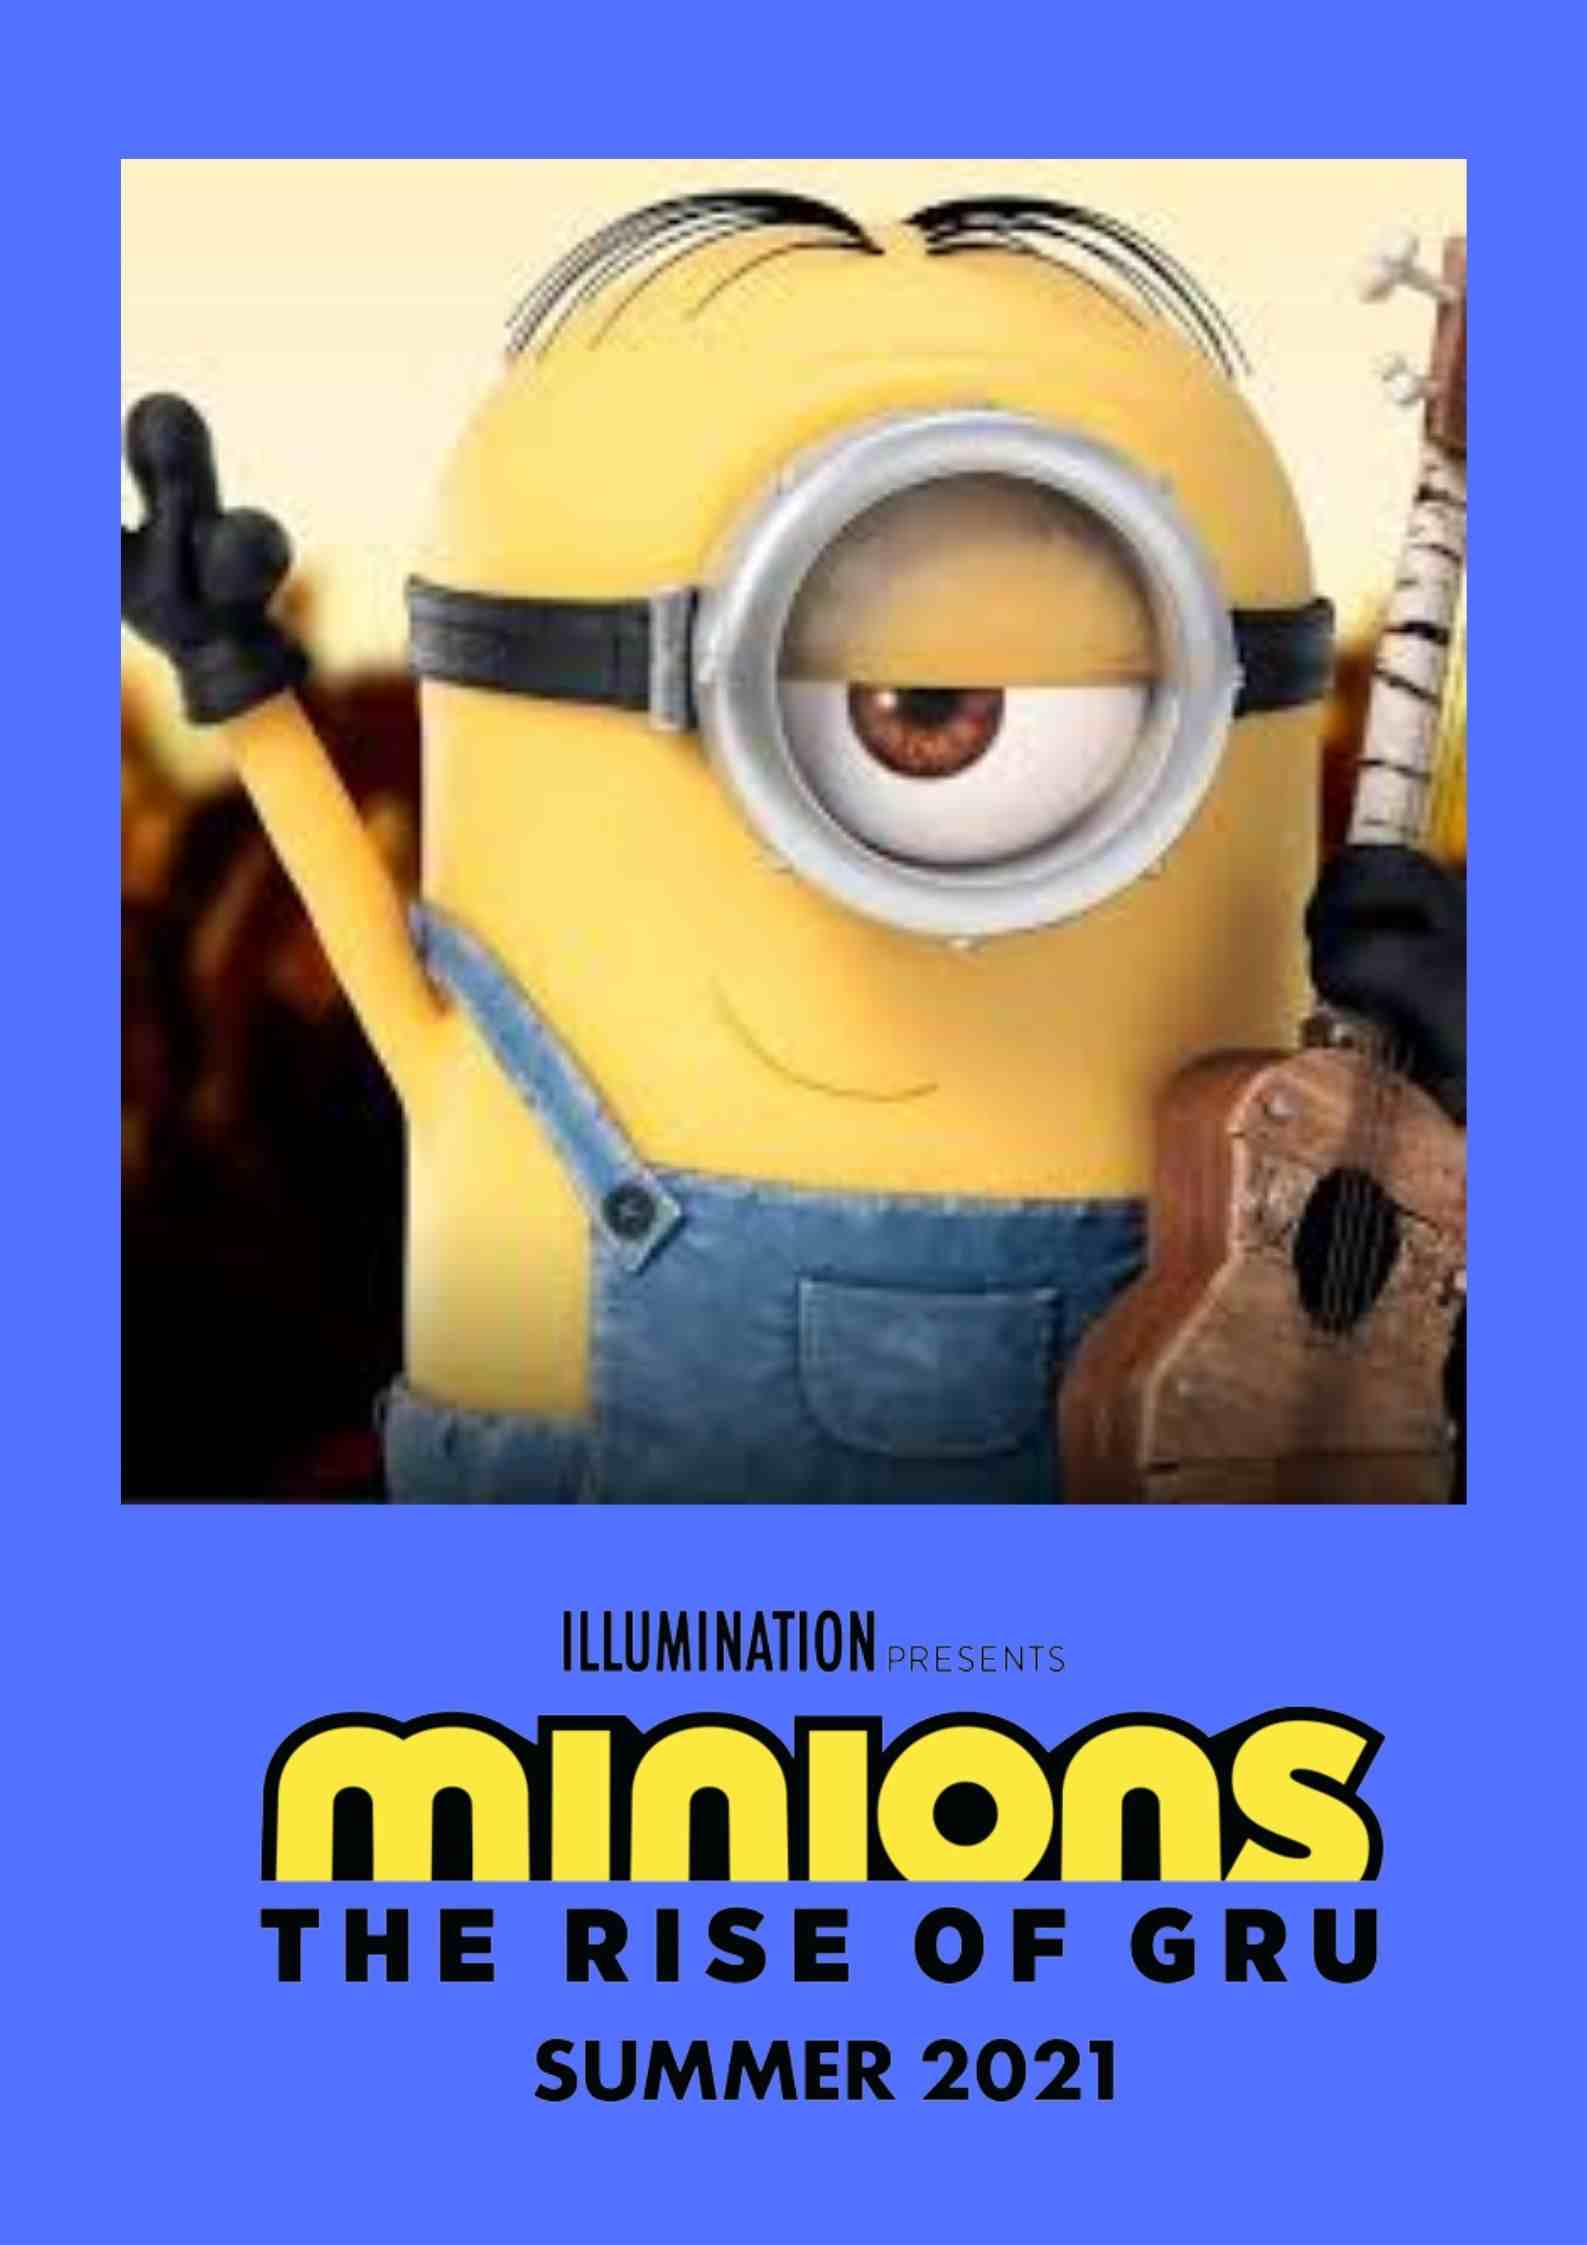 Minions 2 Release Date, Voice Cast, and plot of the story